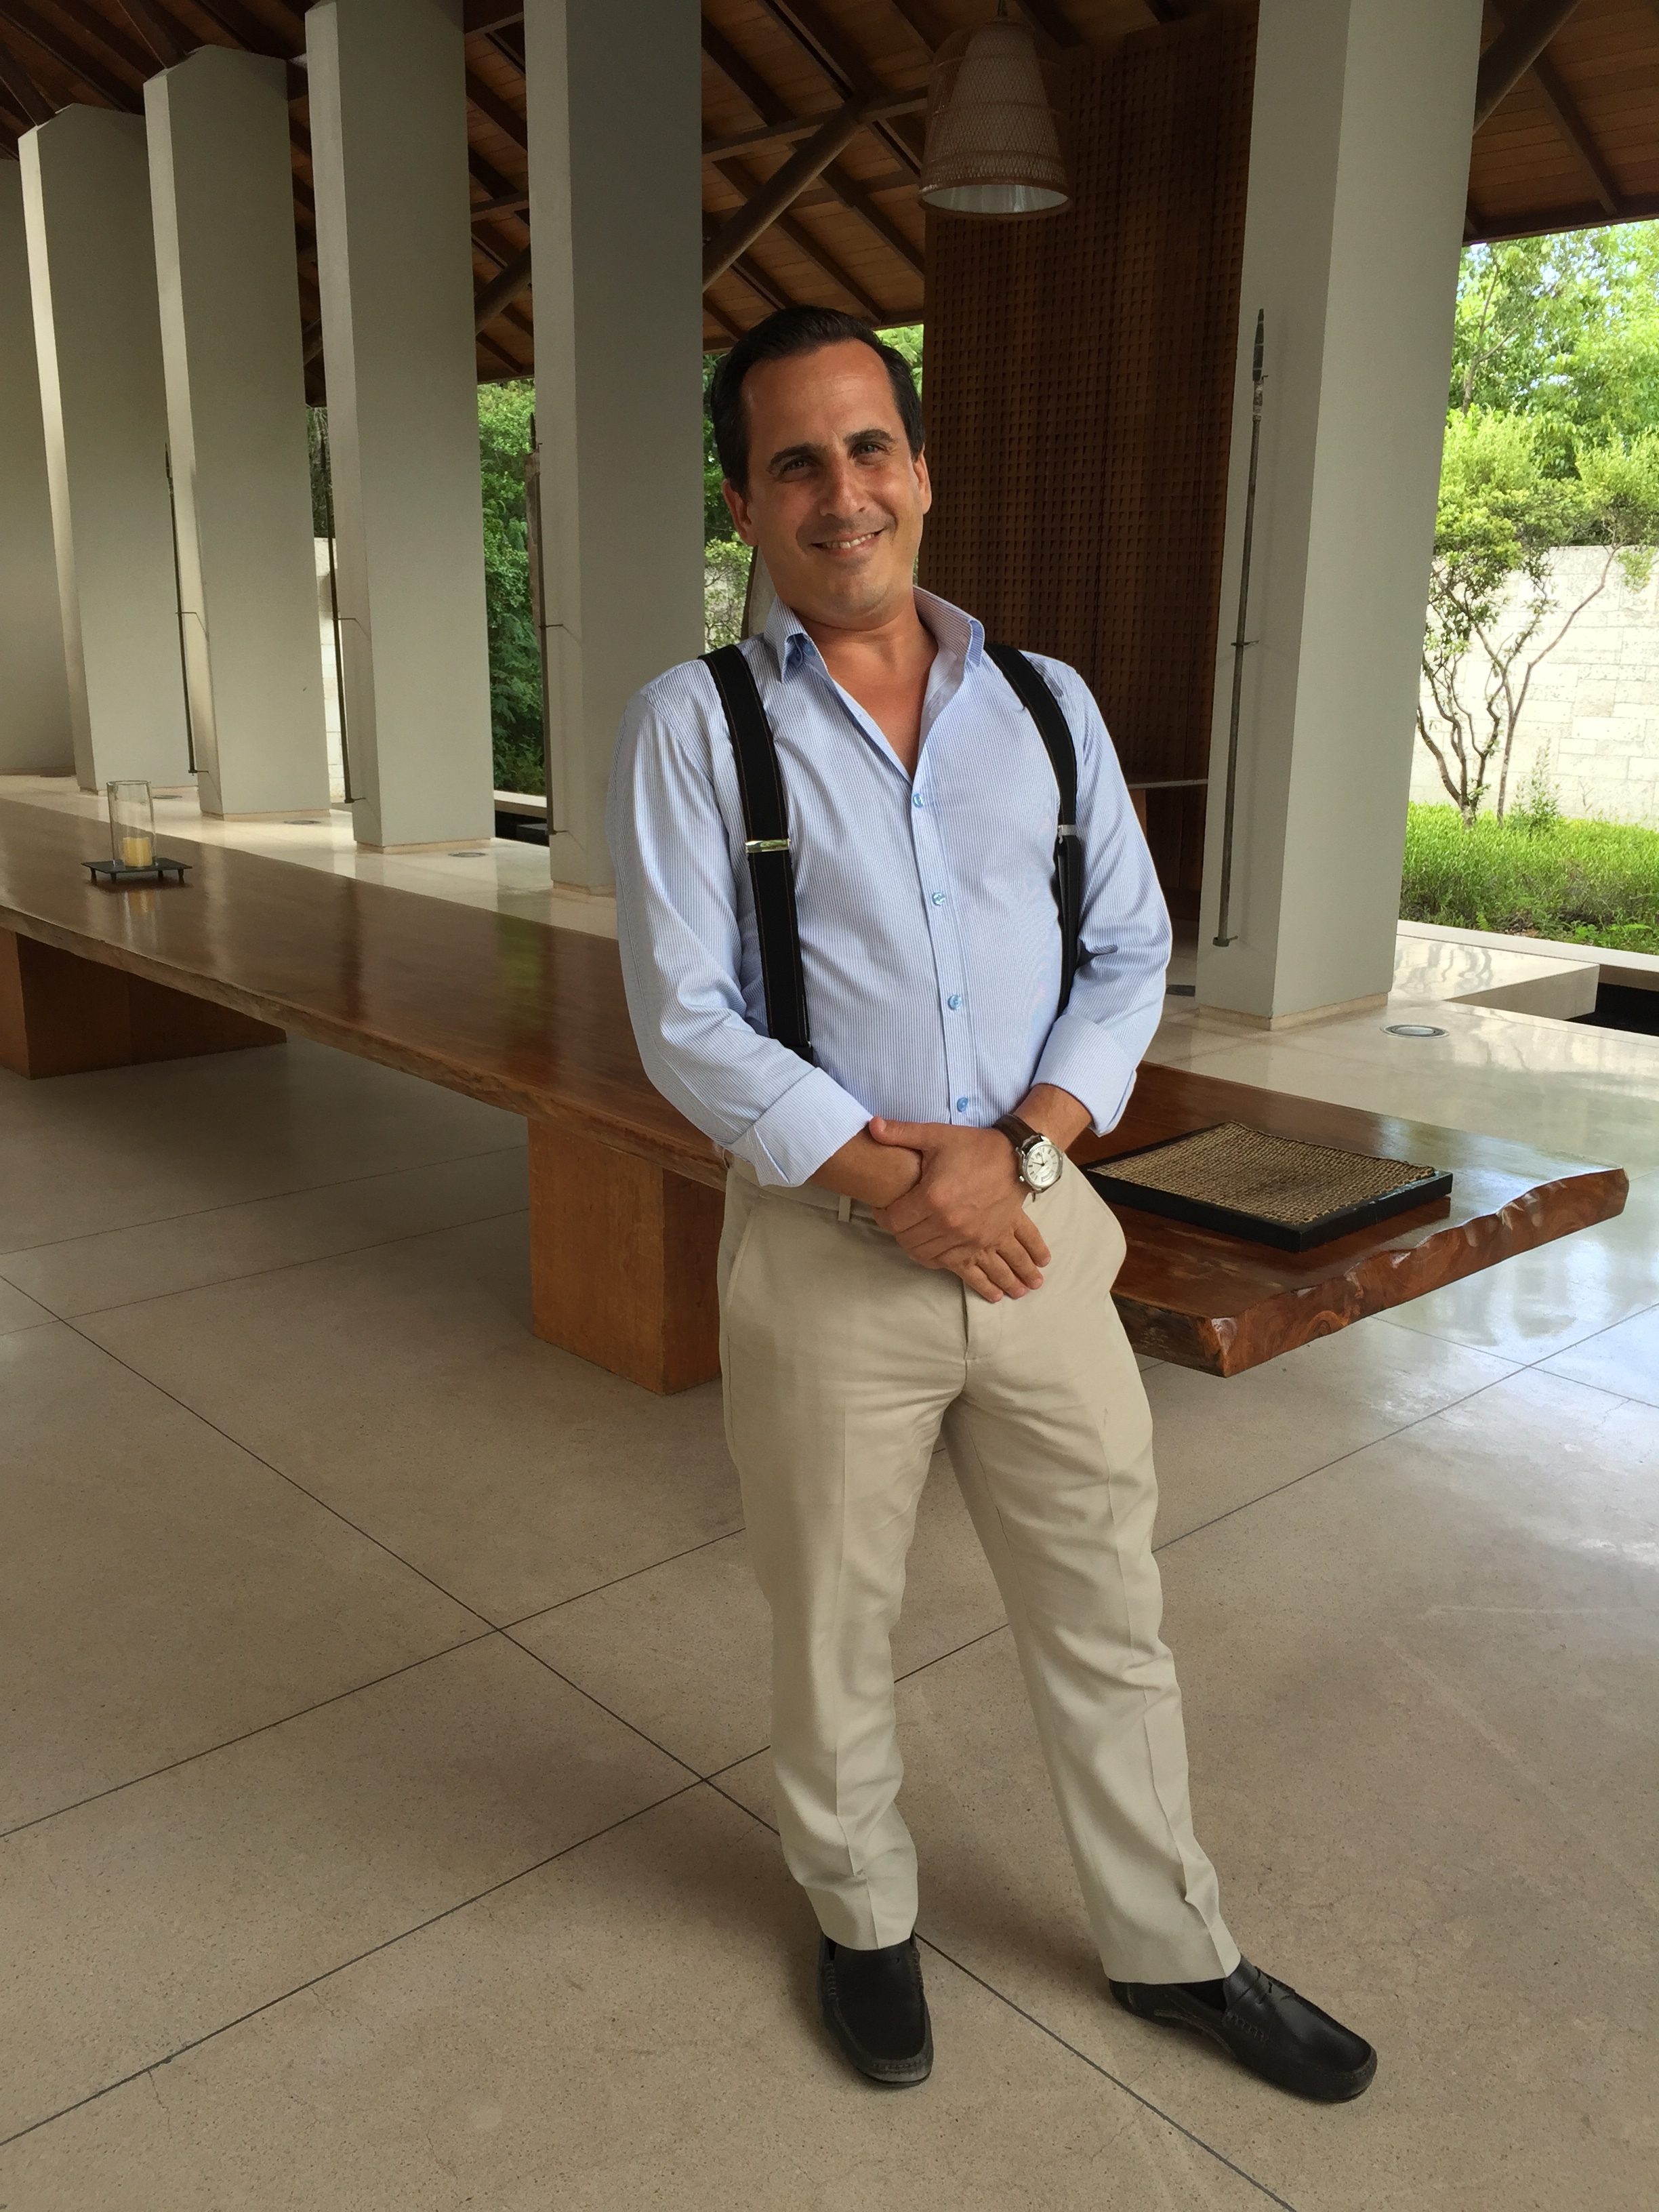 Serge from Switzerland, Amanyara's lovely Resort Manager who always matches his braces to his socks